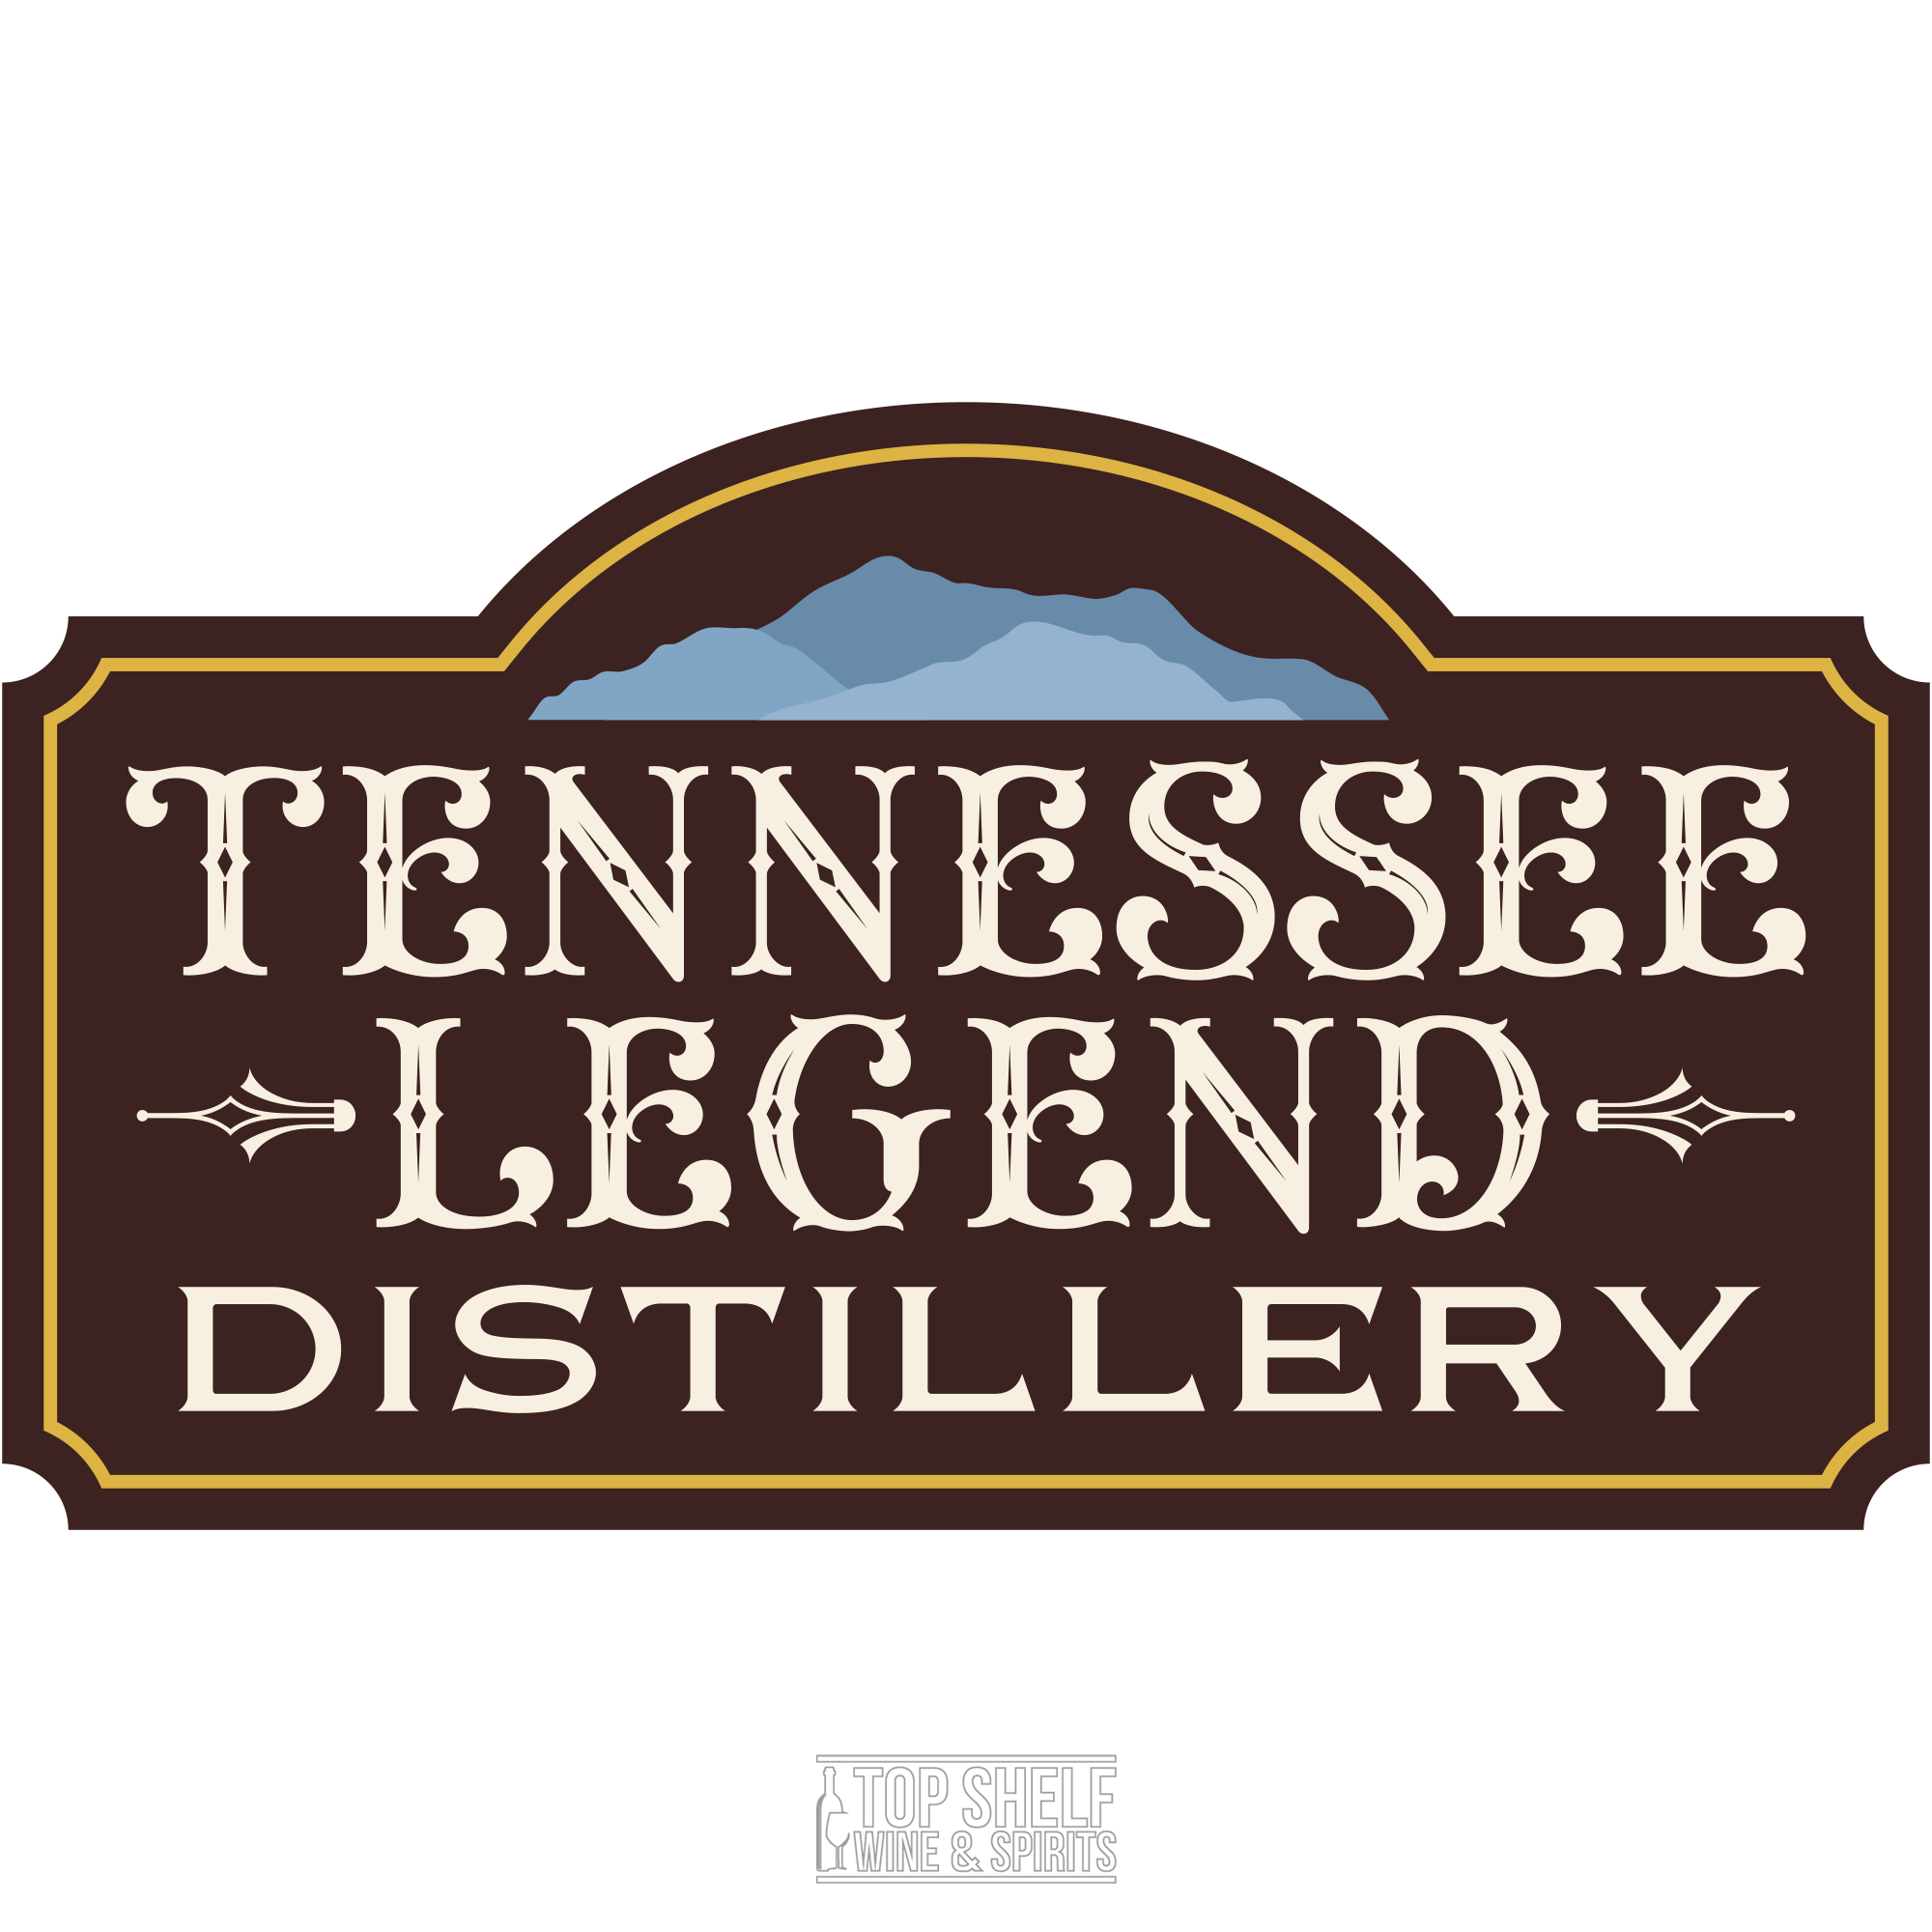 Tennessee Legend Salted Caramel Whiskey